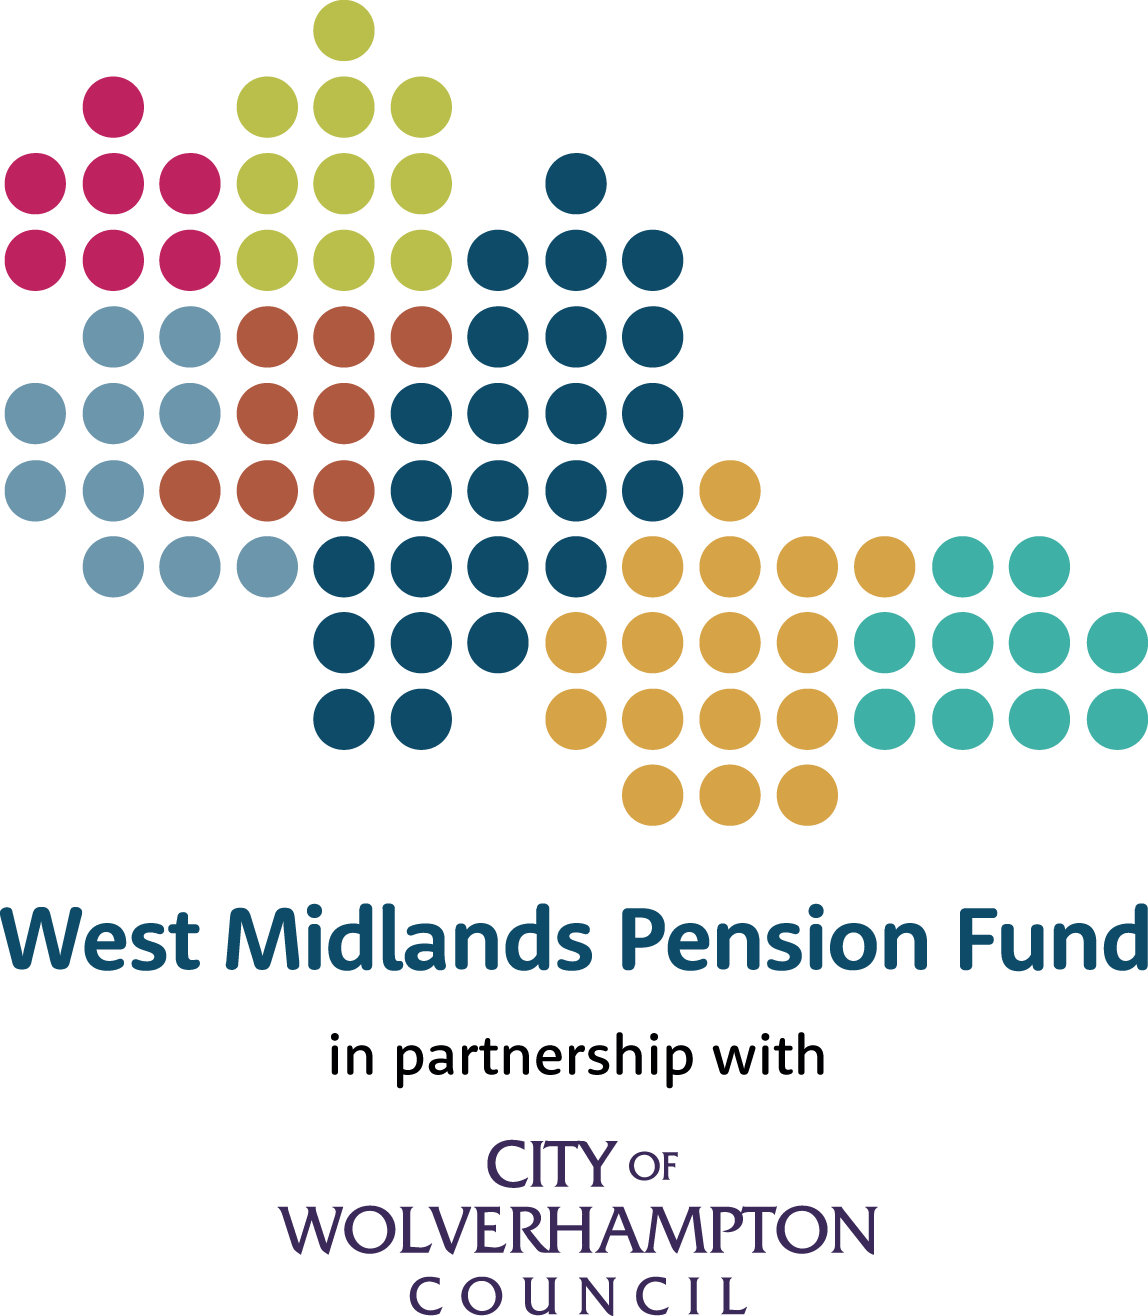 West Midlands Pension Fund logo and City of Wolverhampton Council logo.